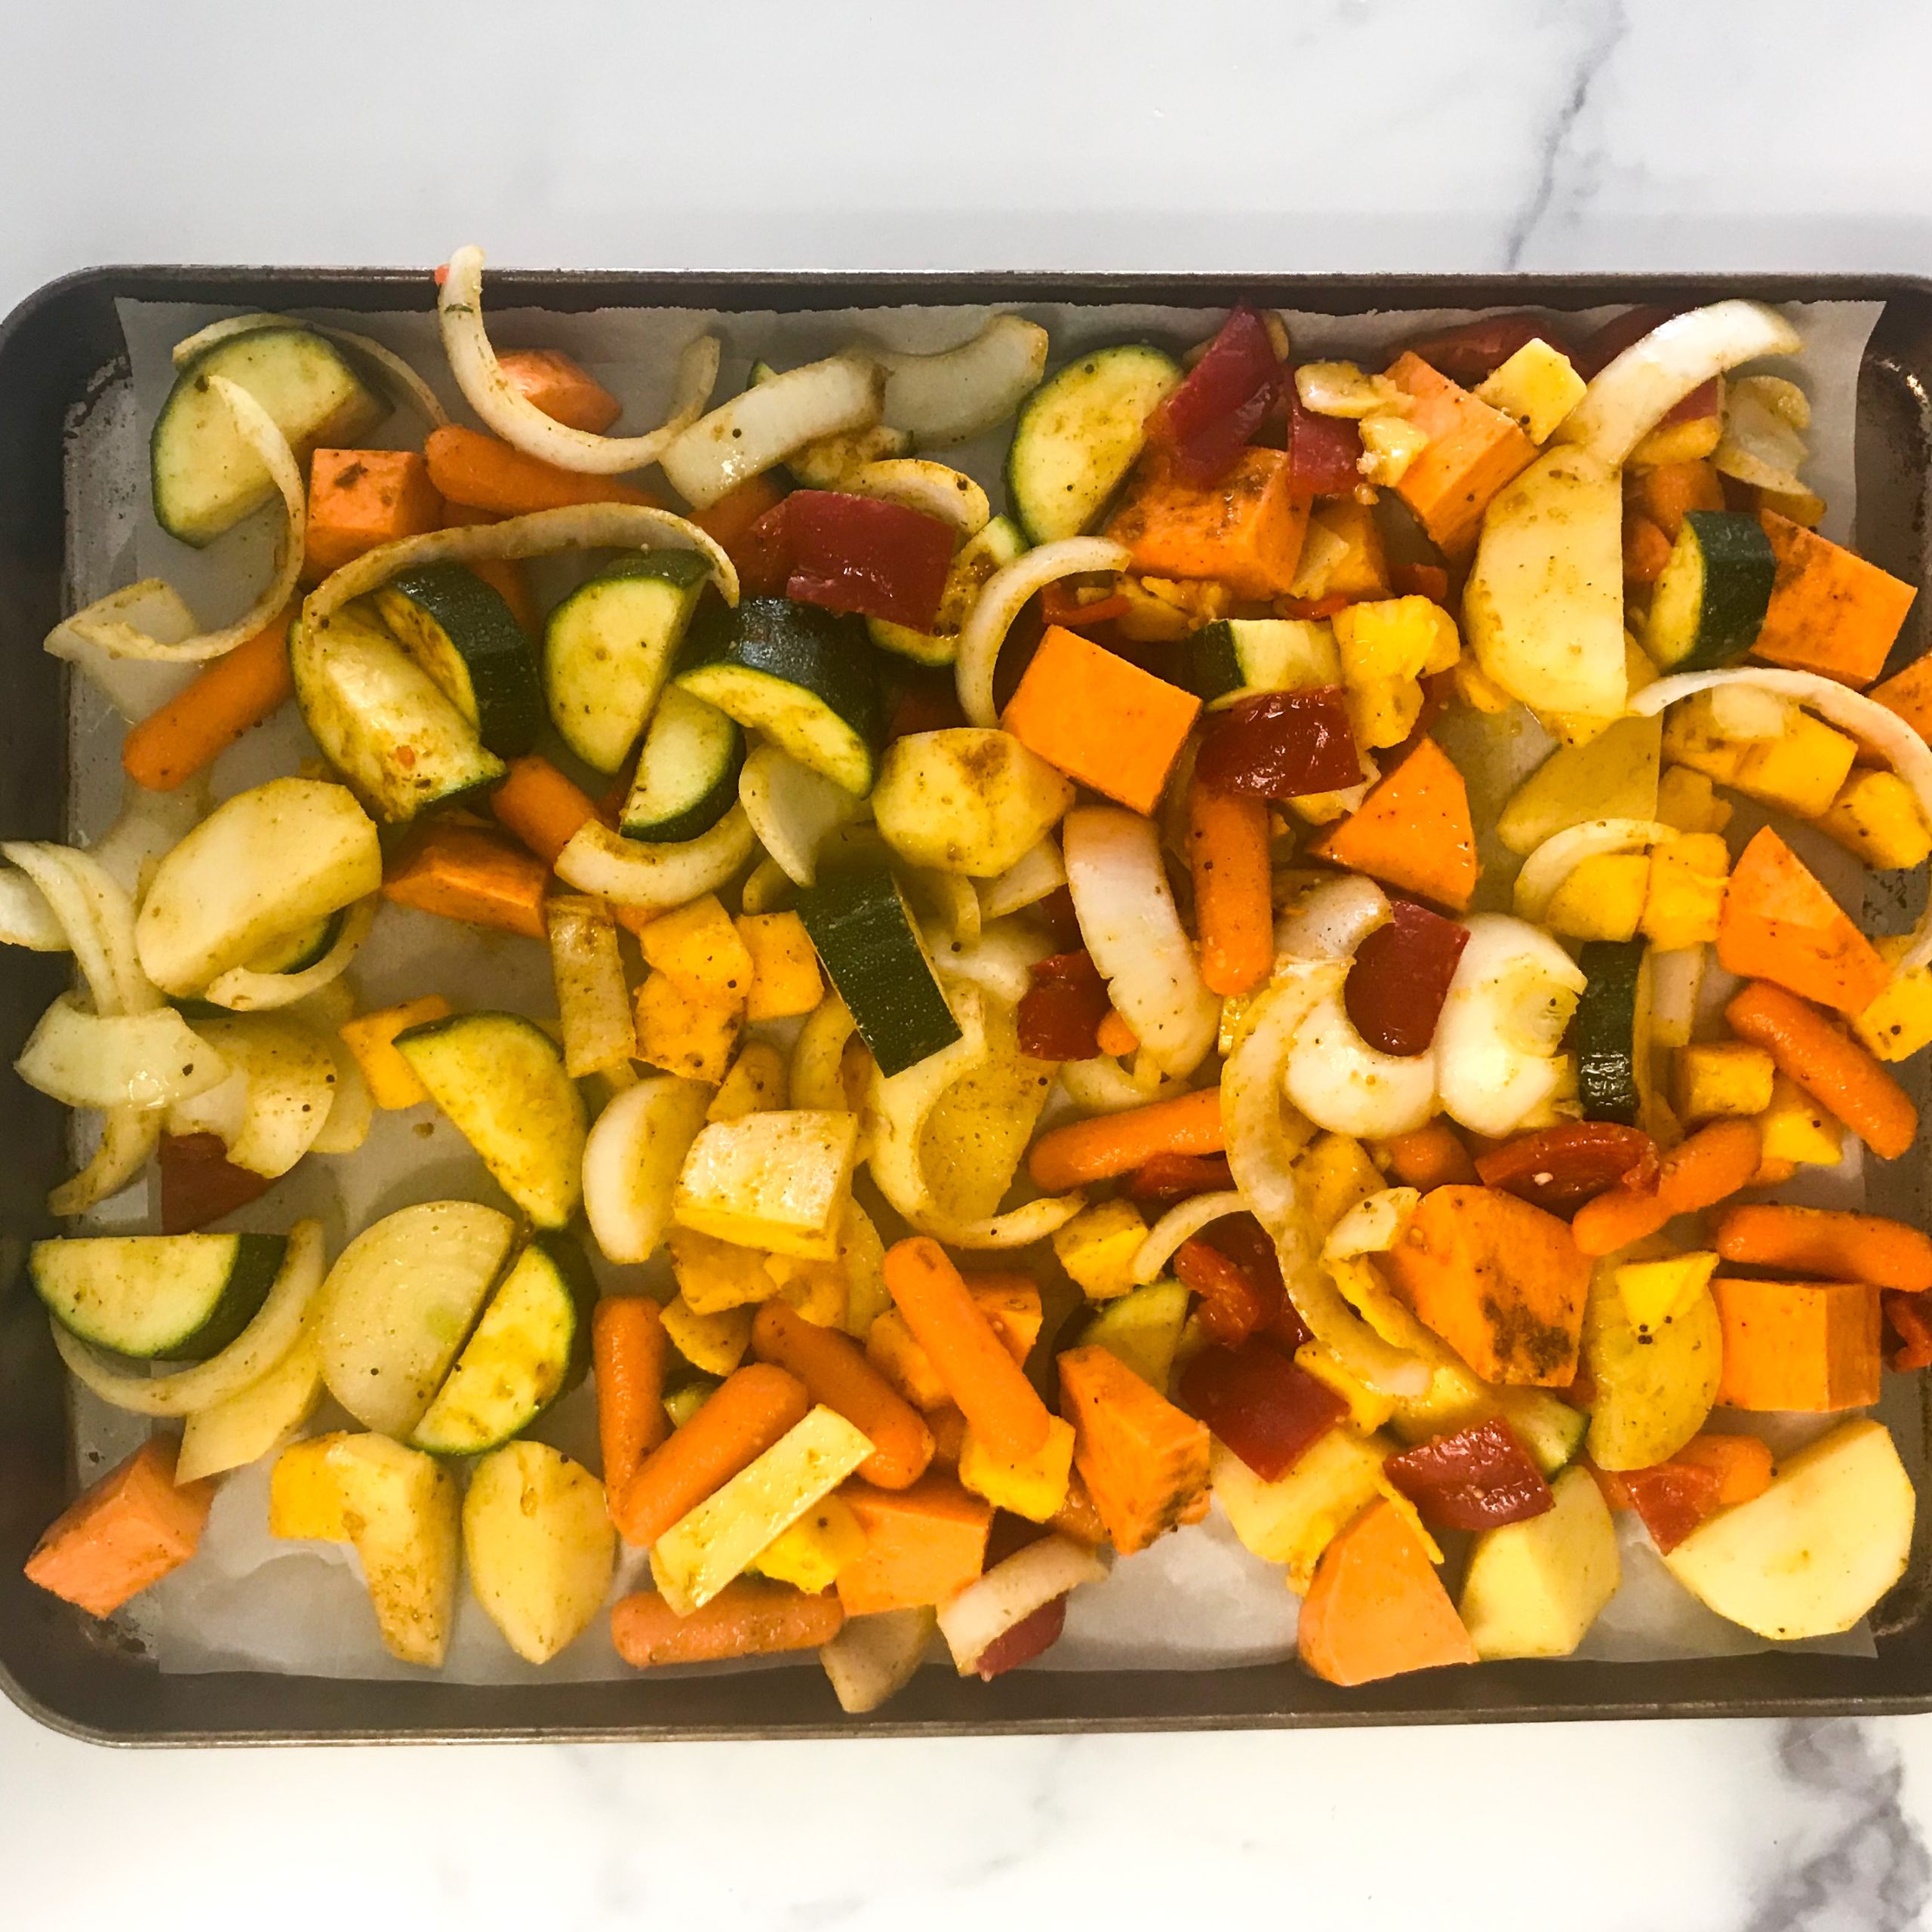 baking sheet with veggies ready for oven